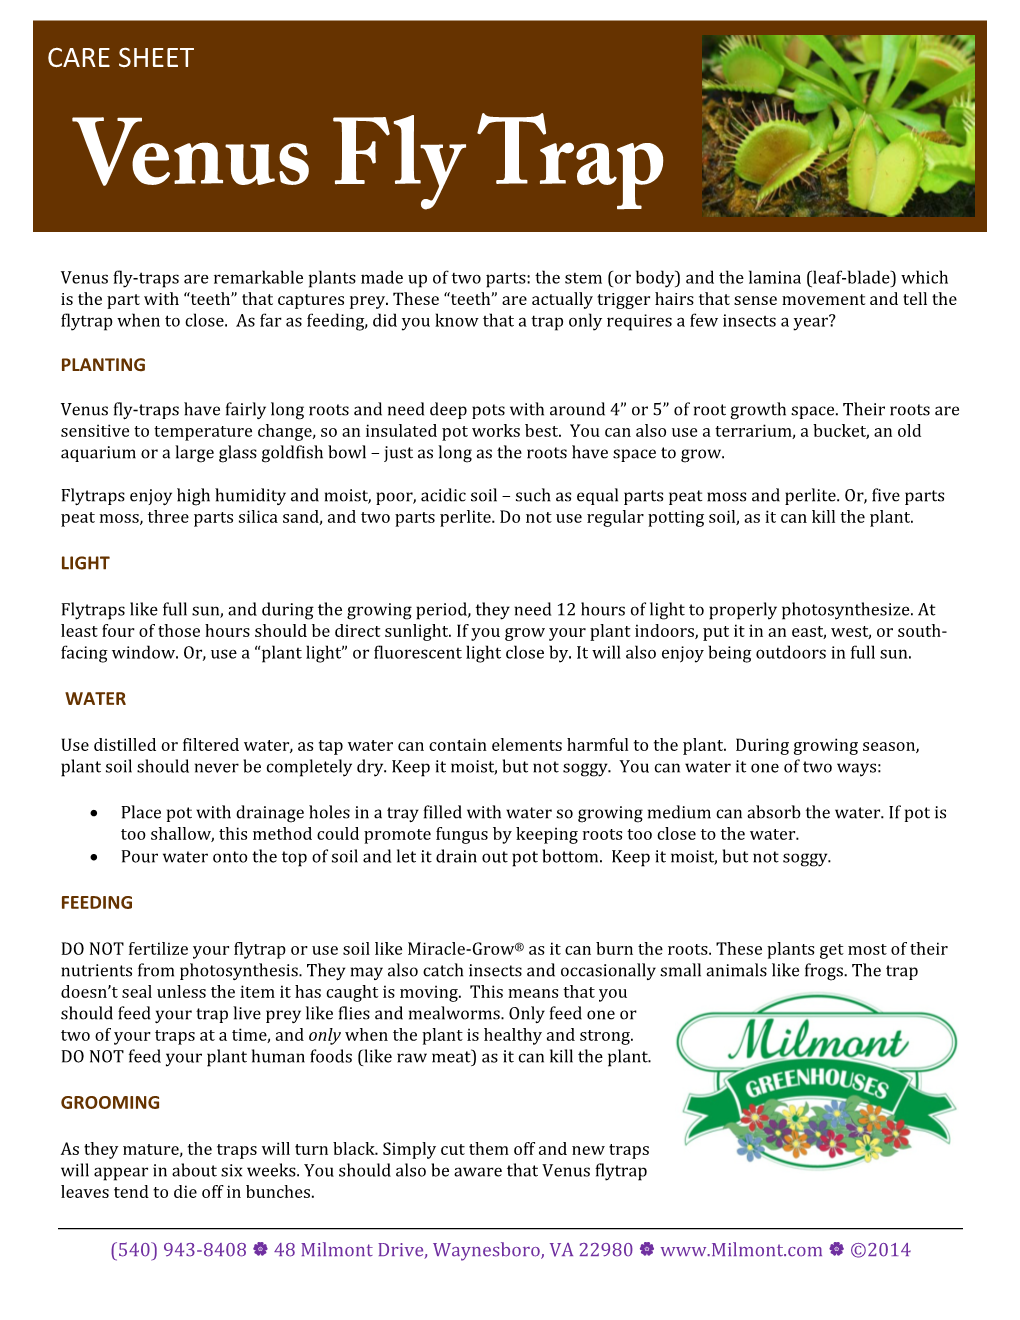 Venus Fly Trap Isn't Very Pretty, and Many People Think It Is Dying During This Period